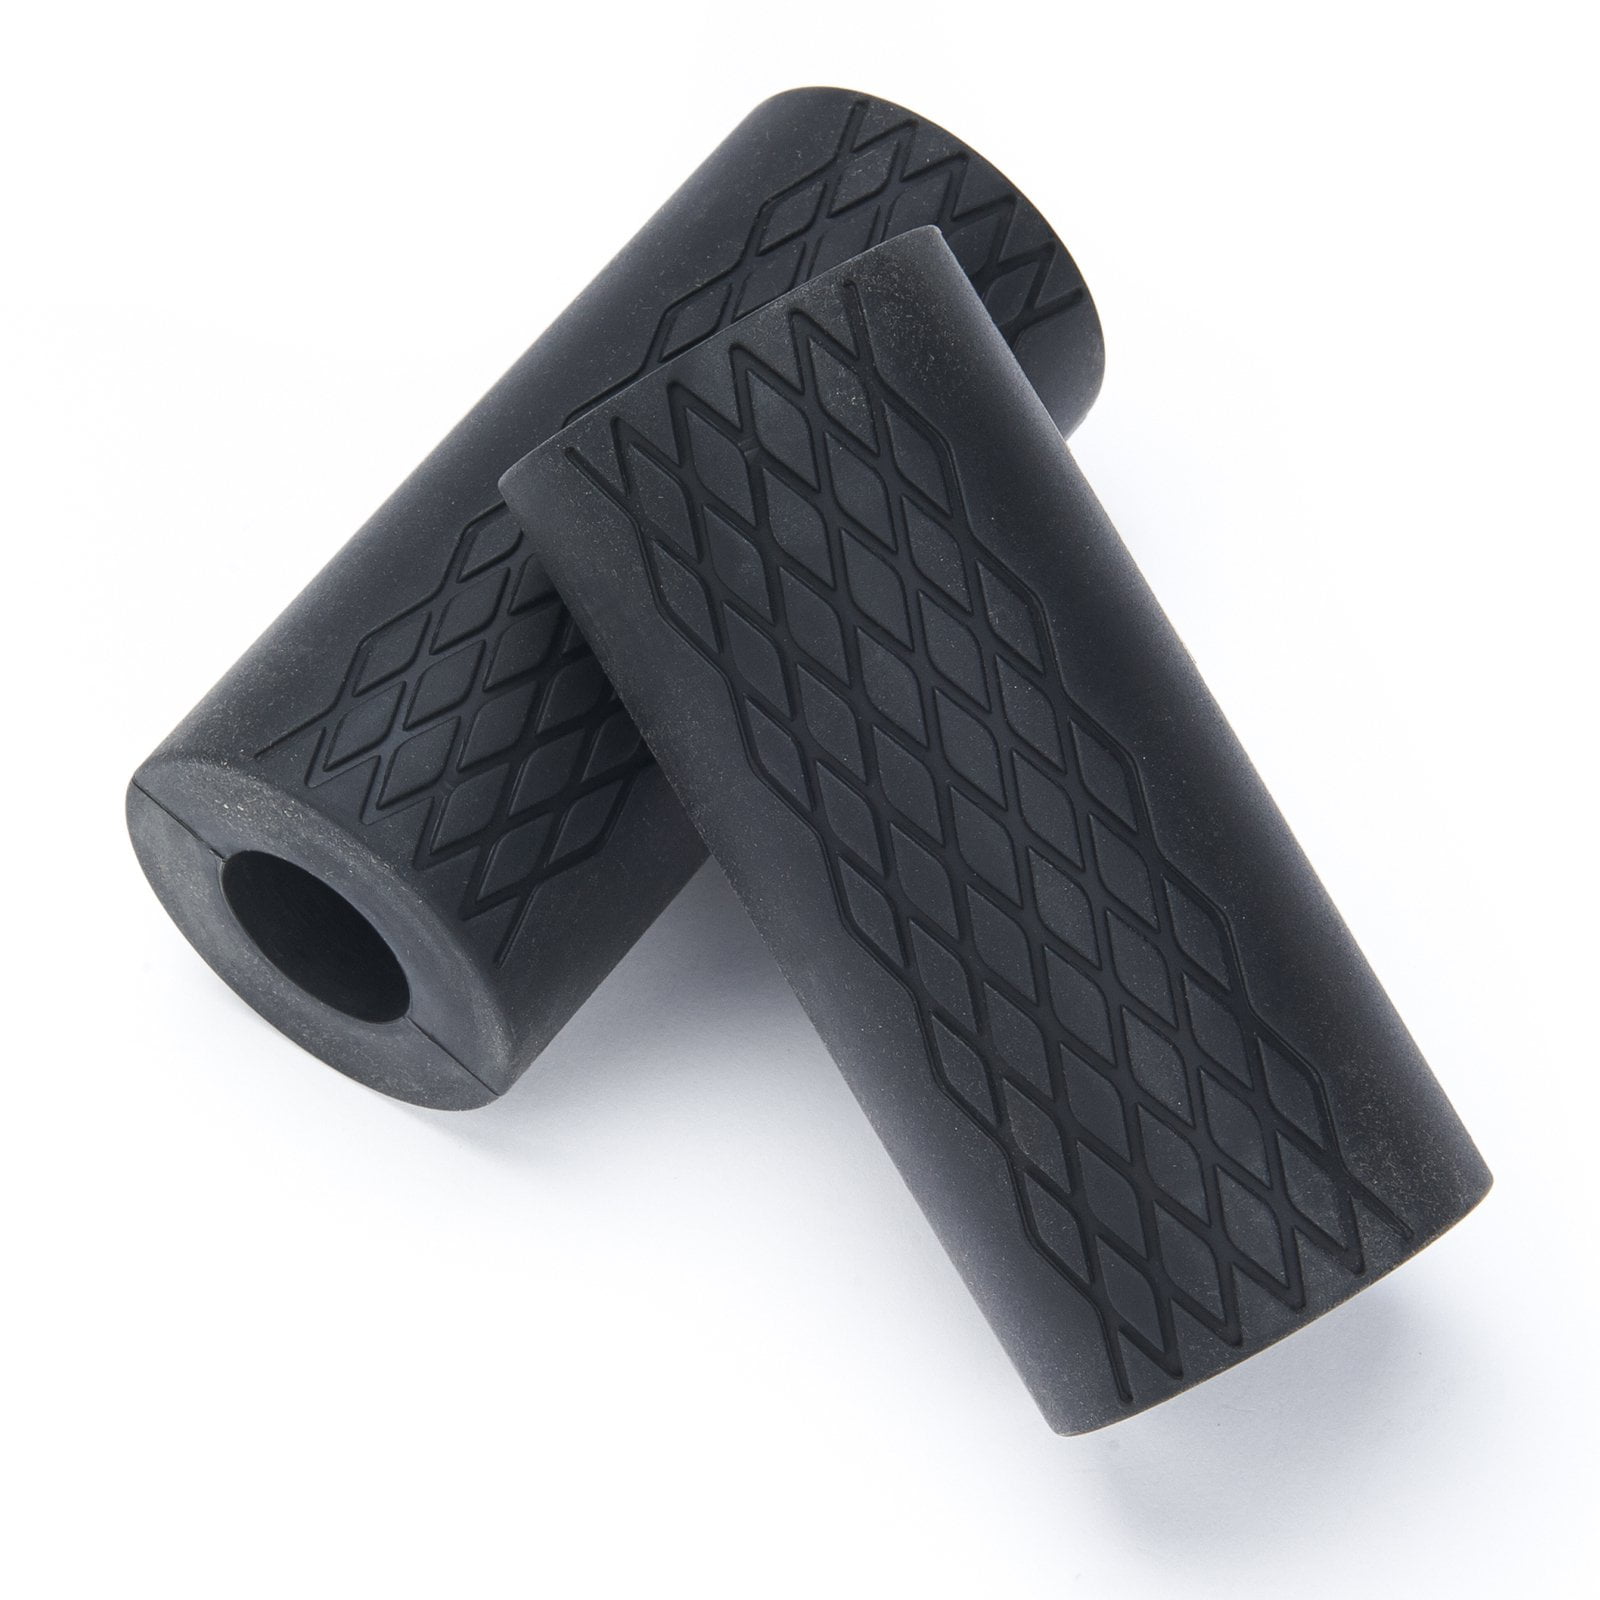 Picture of Black Mountain Products Barbell Grip Black Fat Grips for Barbell & Dumbbell Training, Black